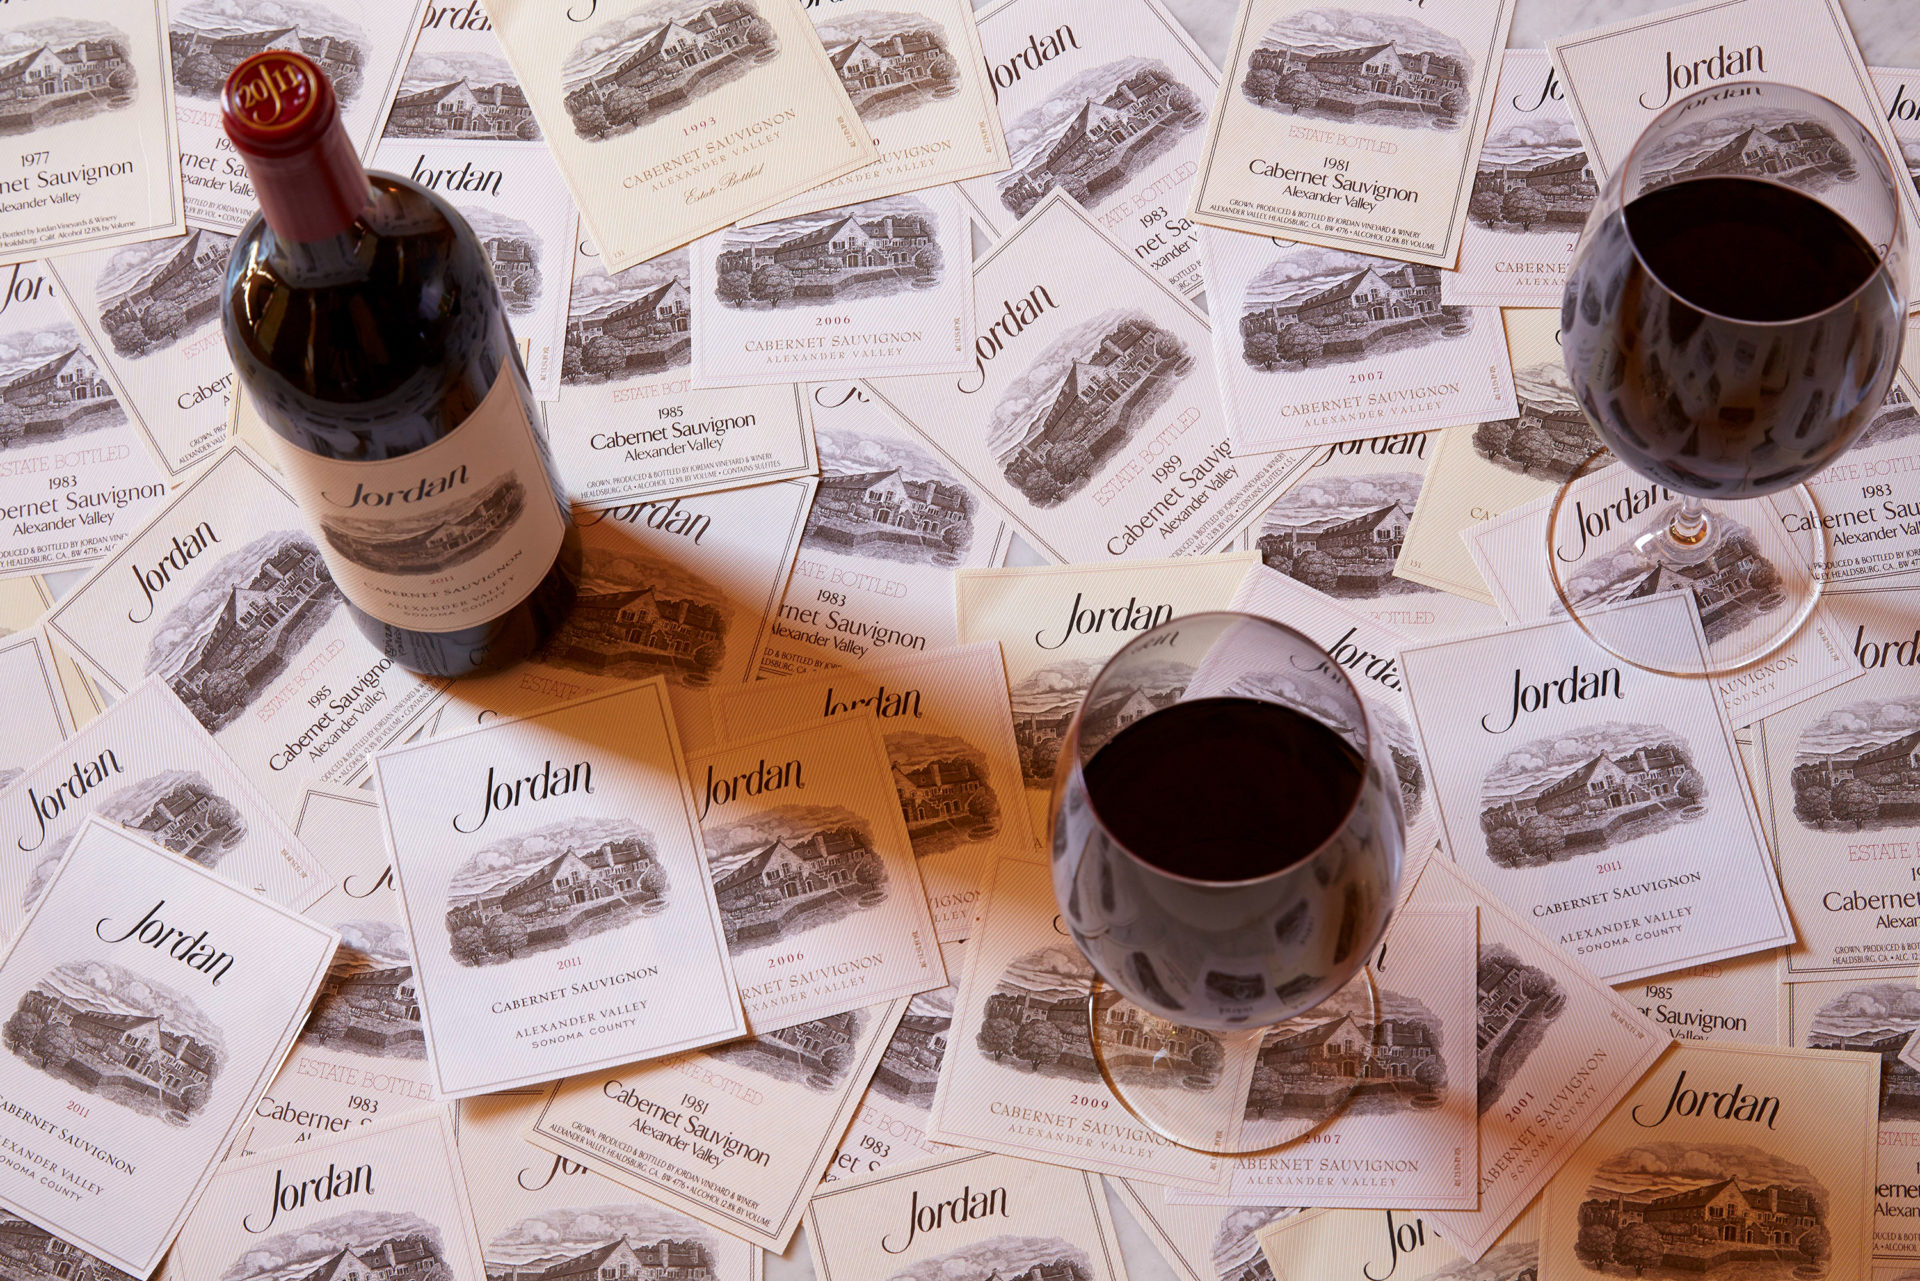 Jordan cabernet with years of labels